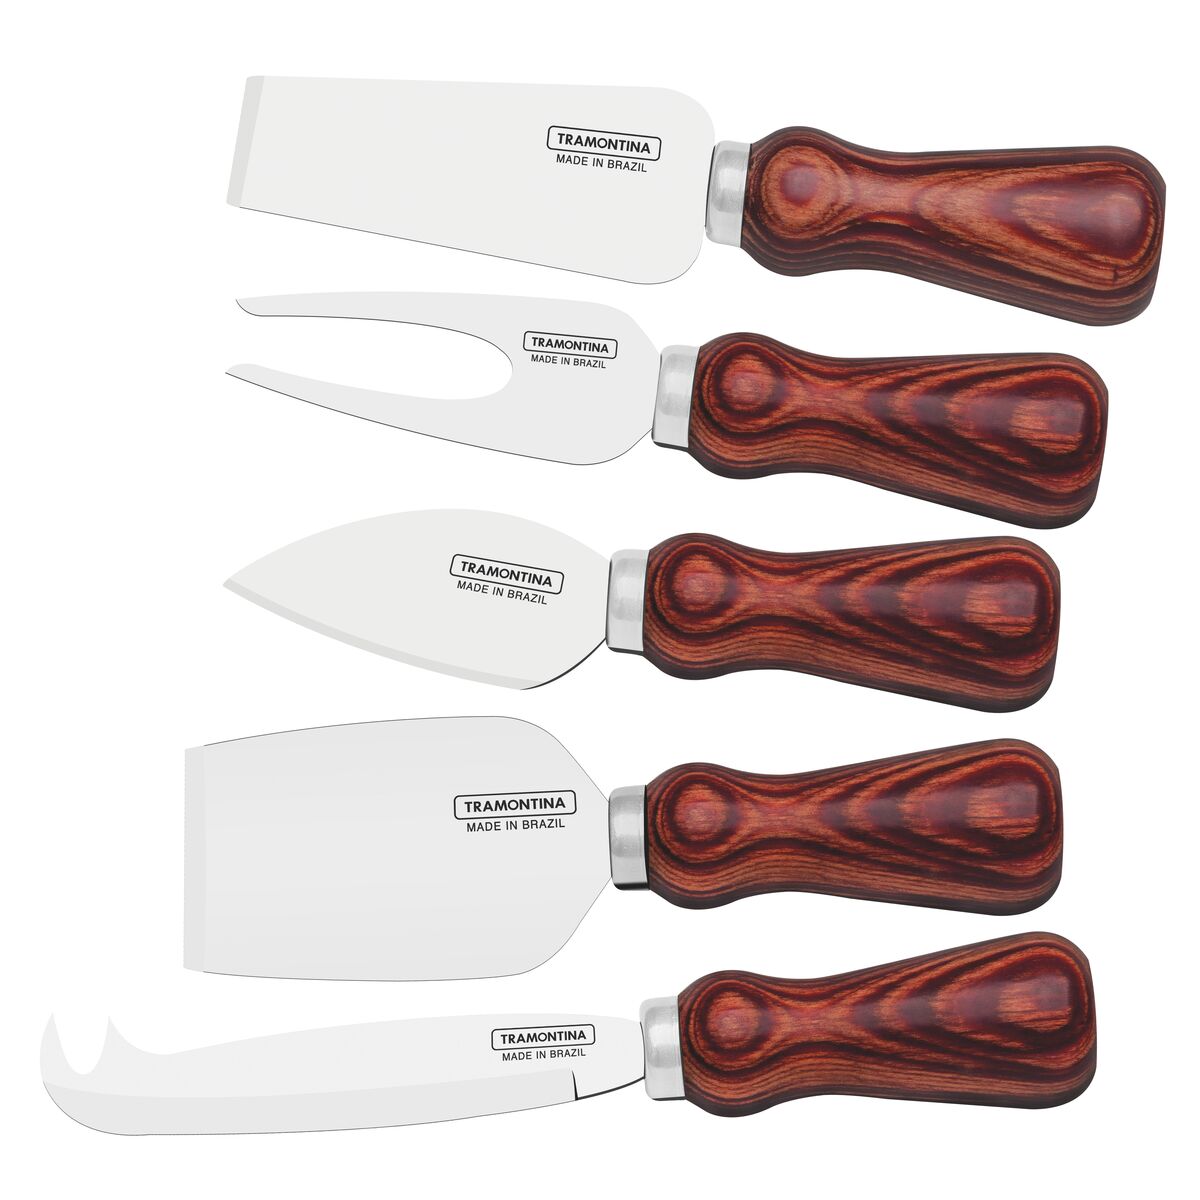 Tramontina Polywood Cheese set 5-Piece Knife Set with Stainless-Steel Blades and Red Treated Wood Handles